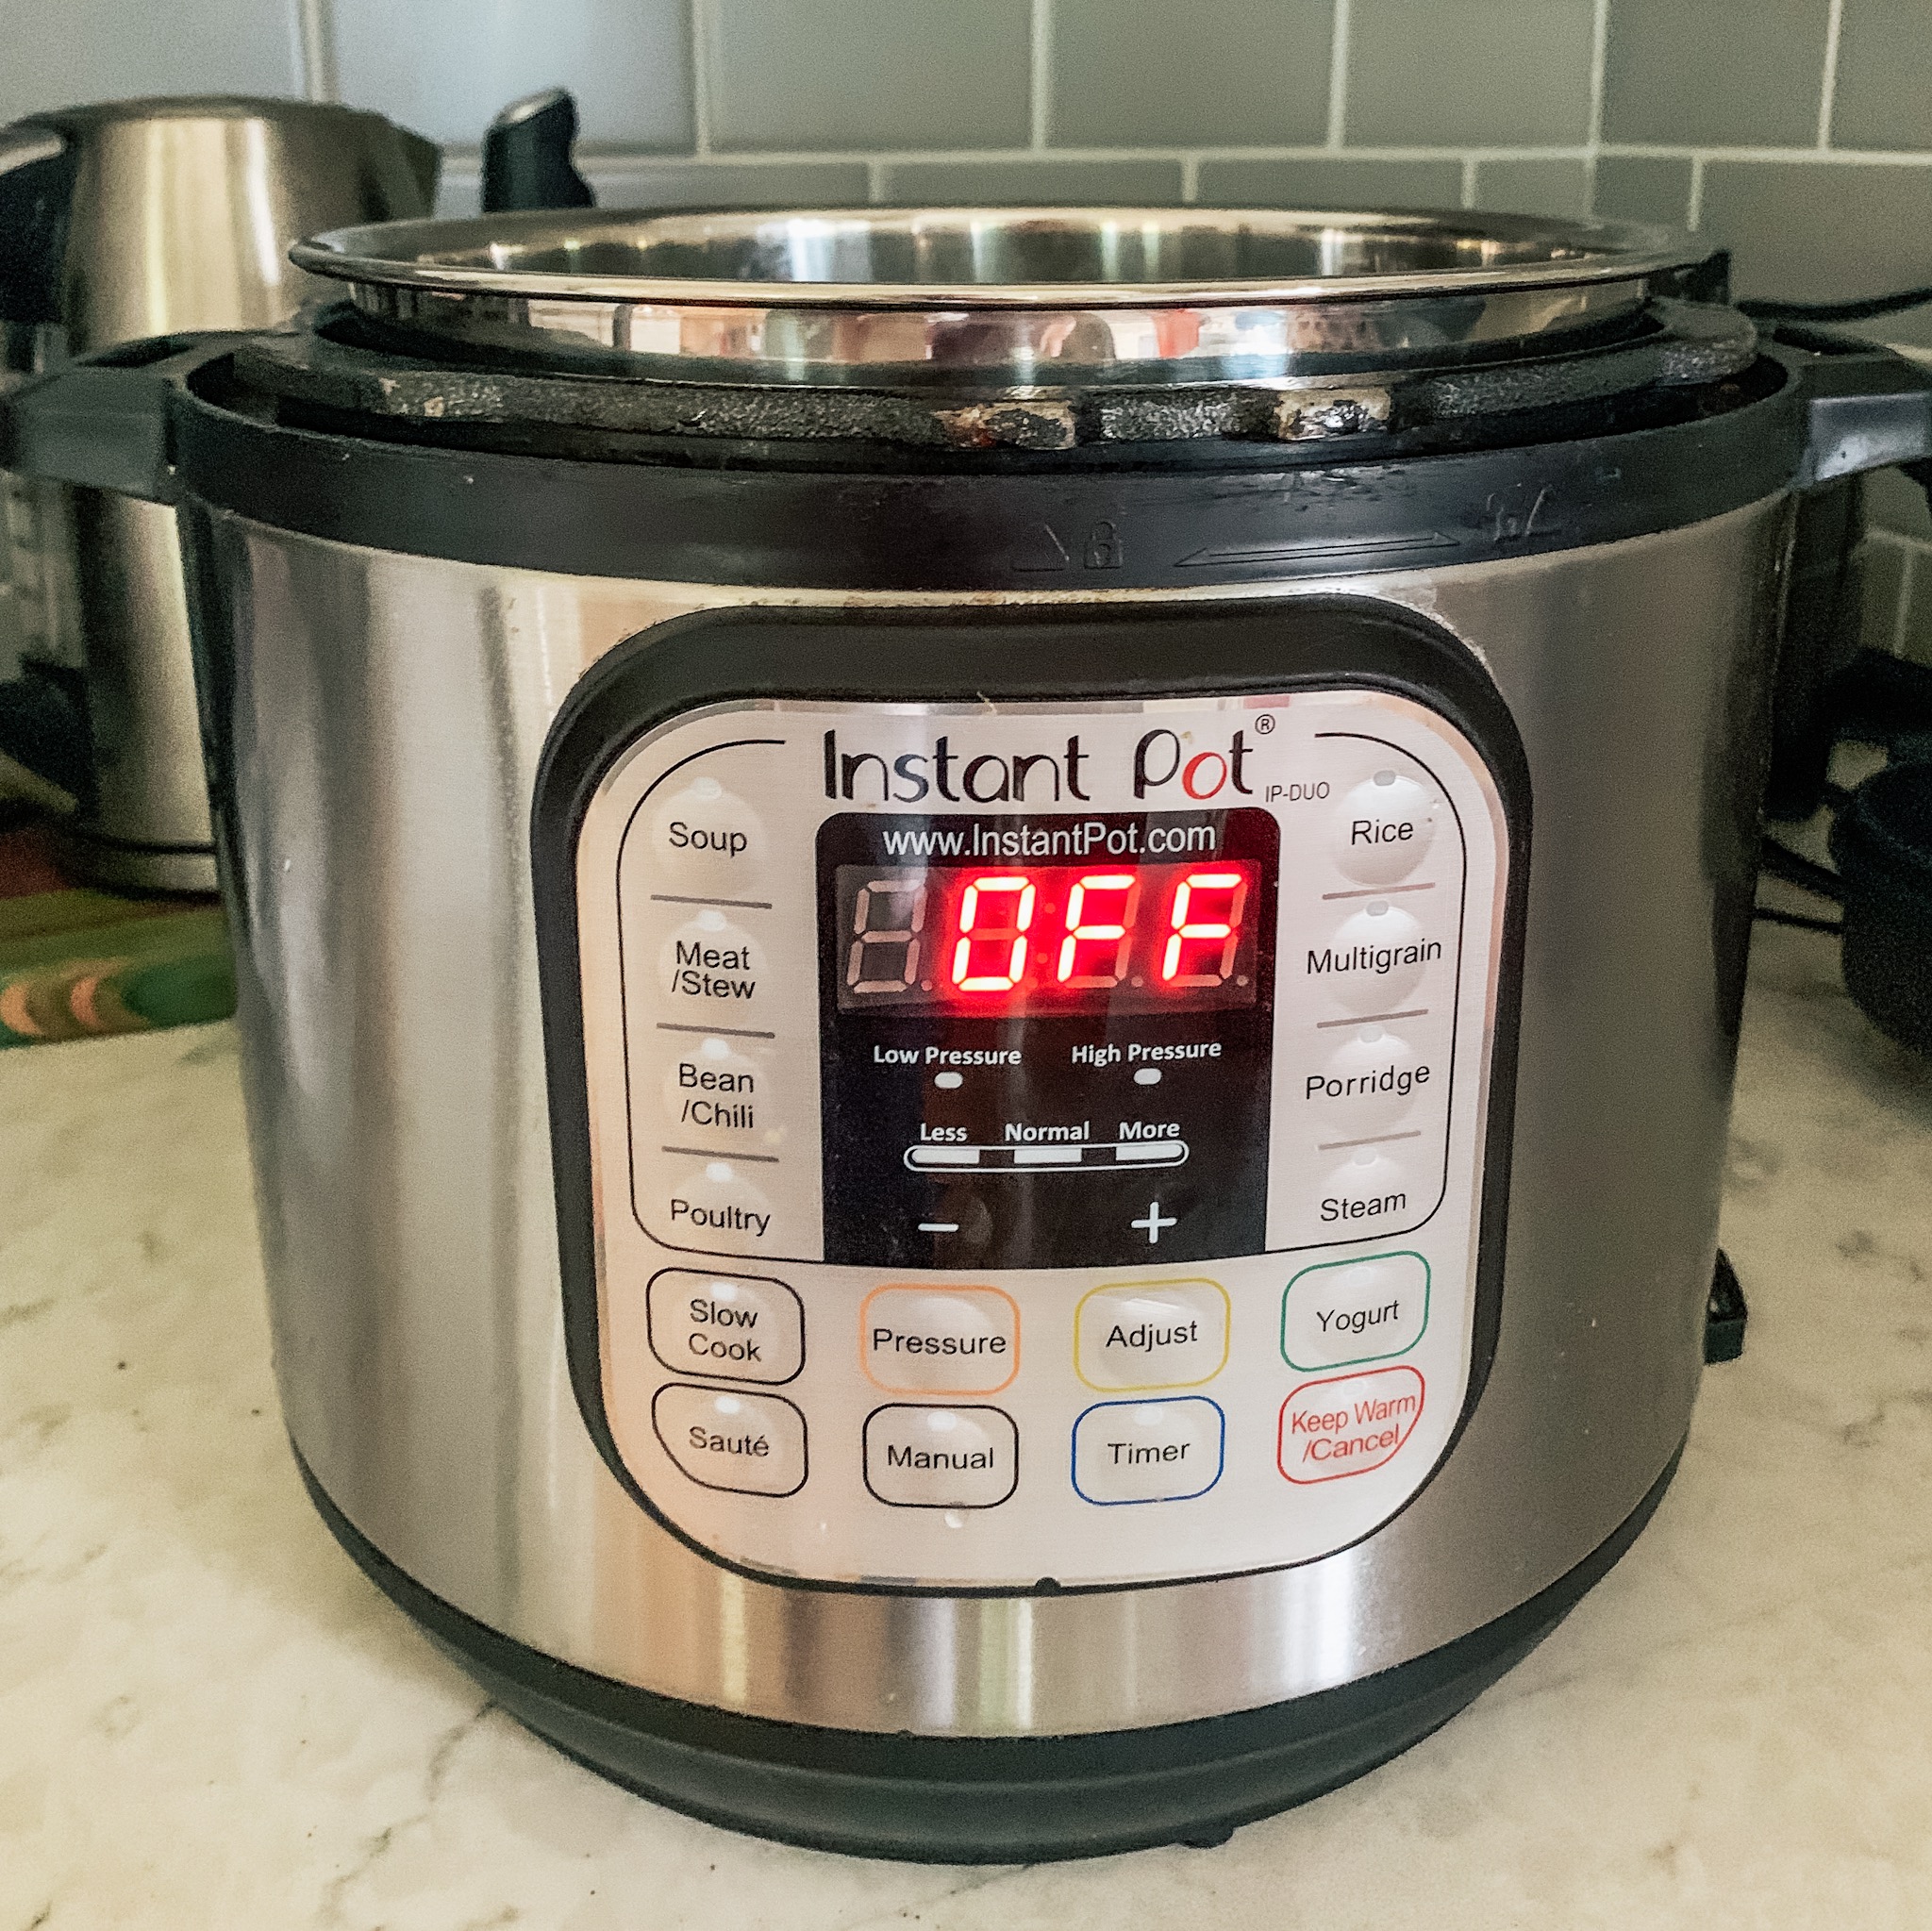 Instant Pot Review: Is it worth it? Your questions answered.